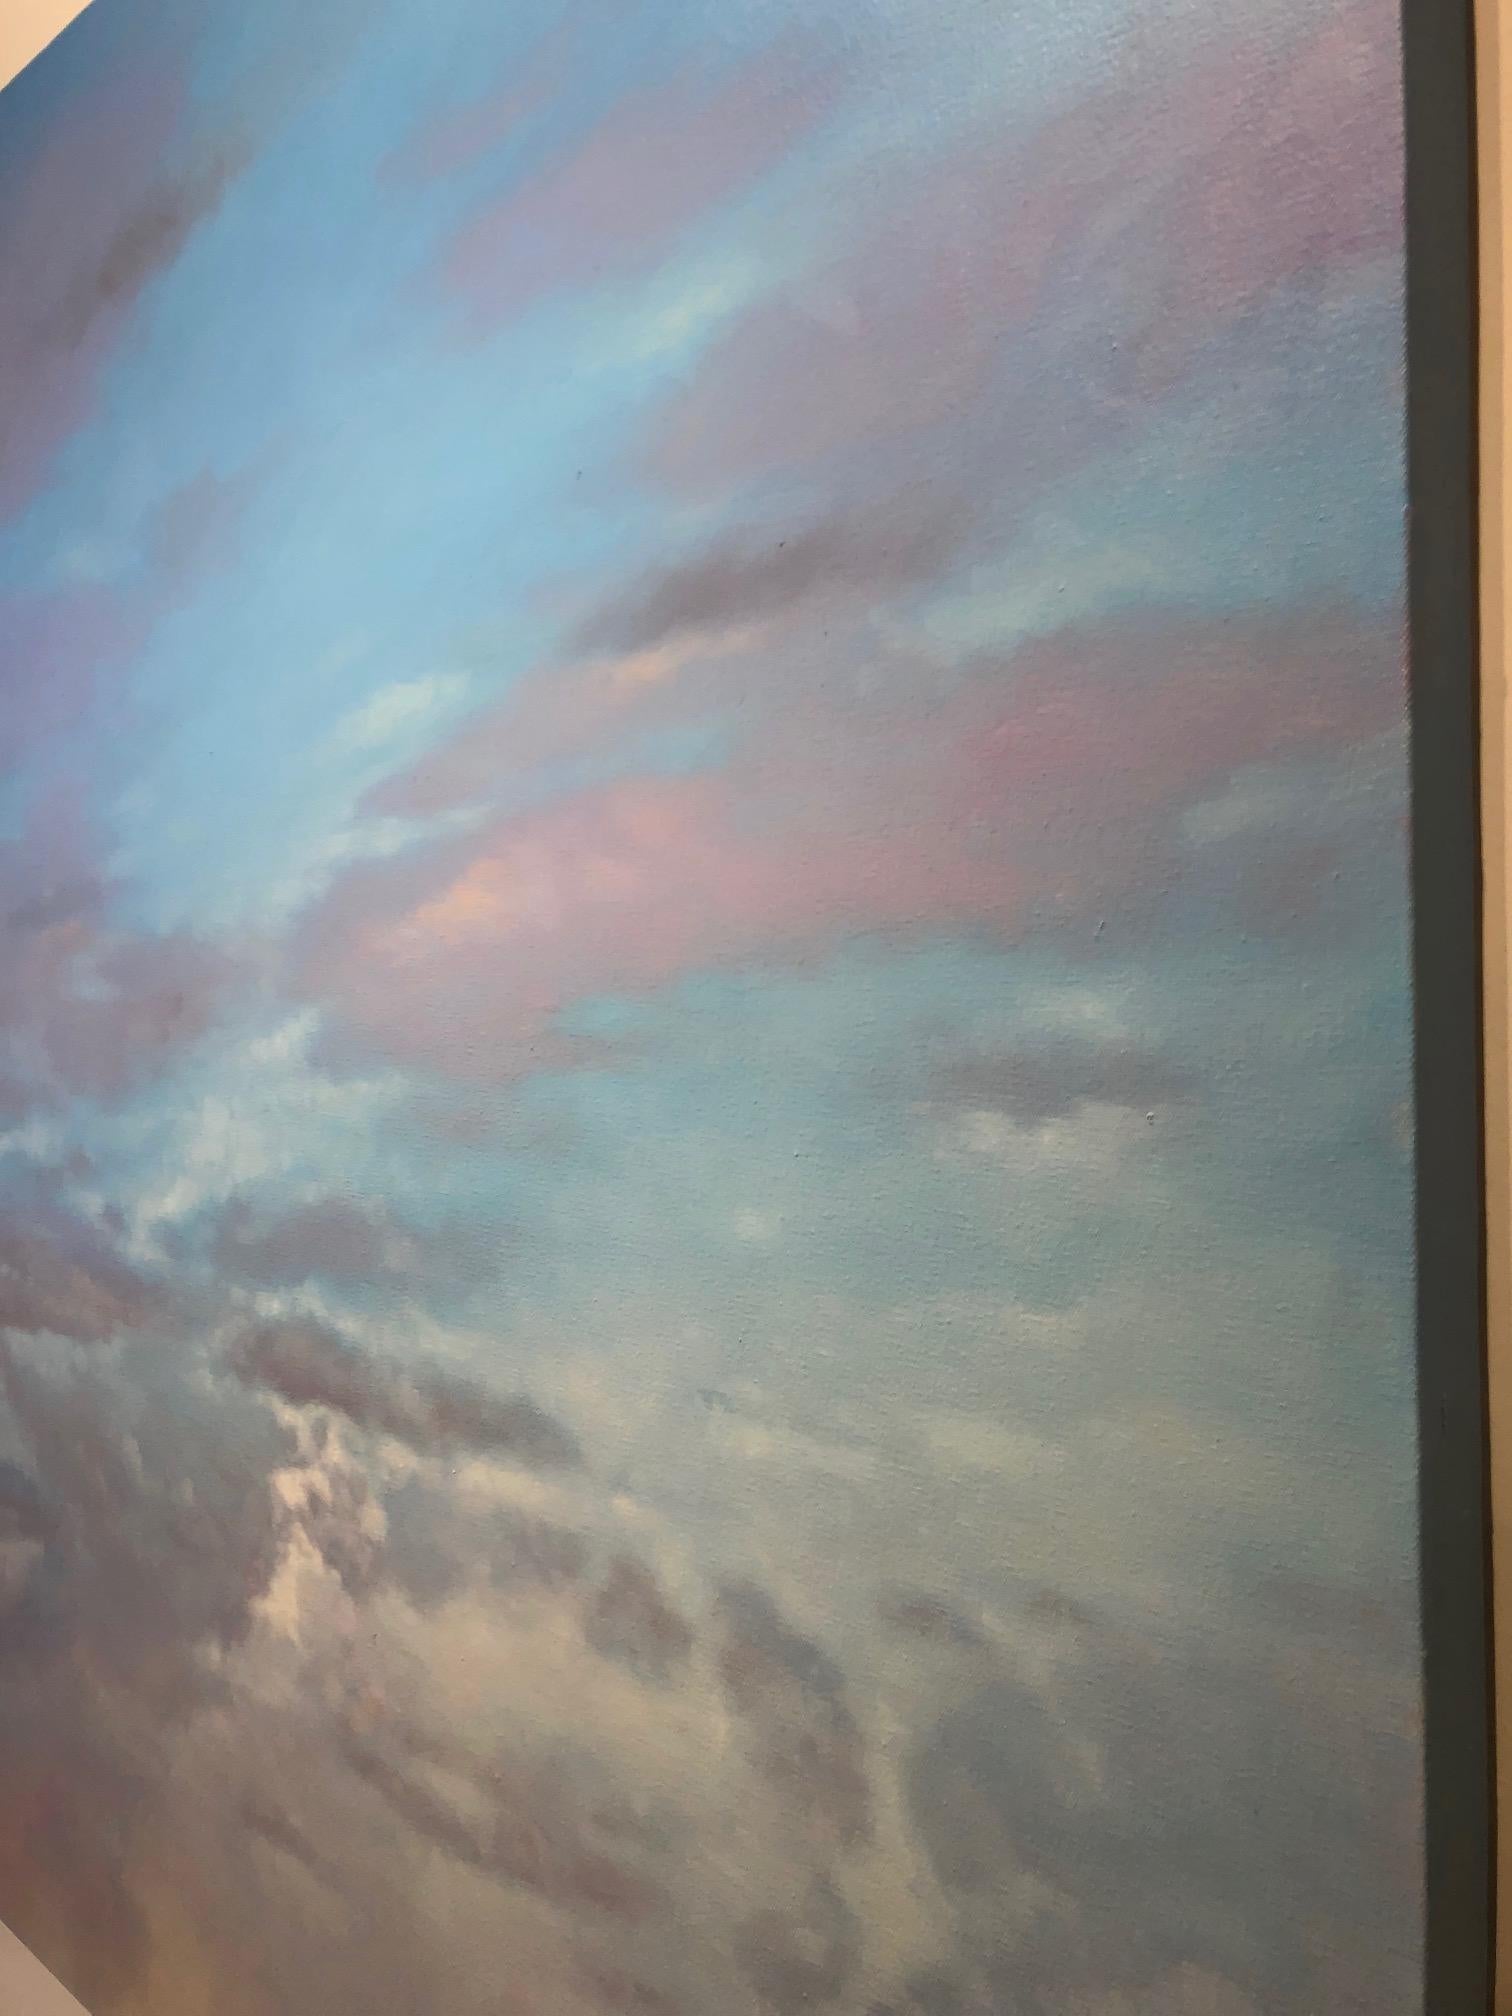 Stunning open sky painting, contemporary sky scape  — in blue. Like a window to a wide open brilliant and cool sky. 48 x 48 inches. 

One of our finest American contemporary realist painters, Willard Dixon has painted Northern California and western